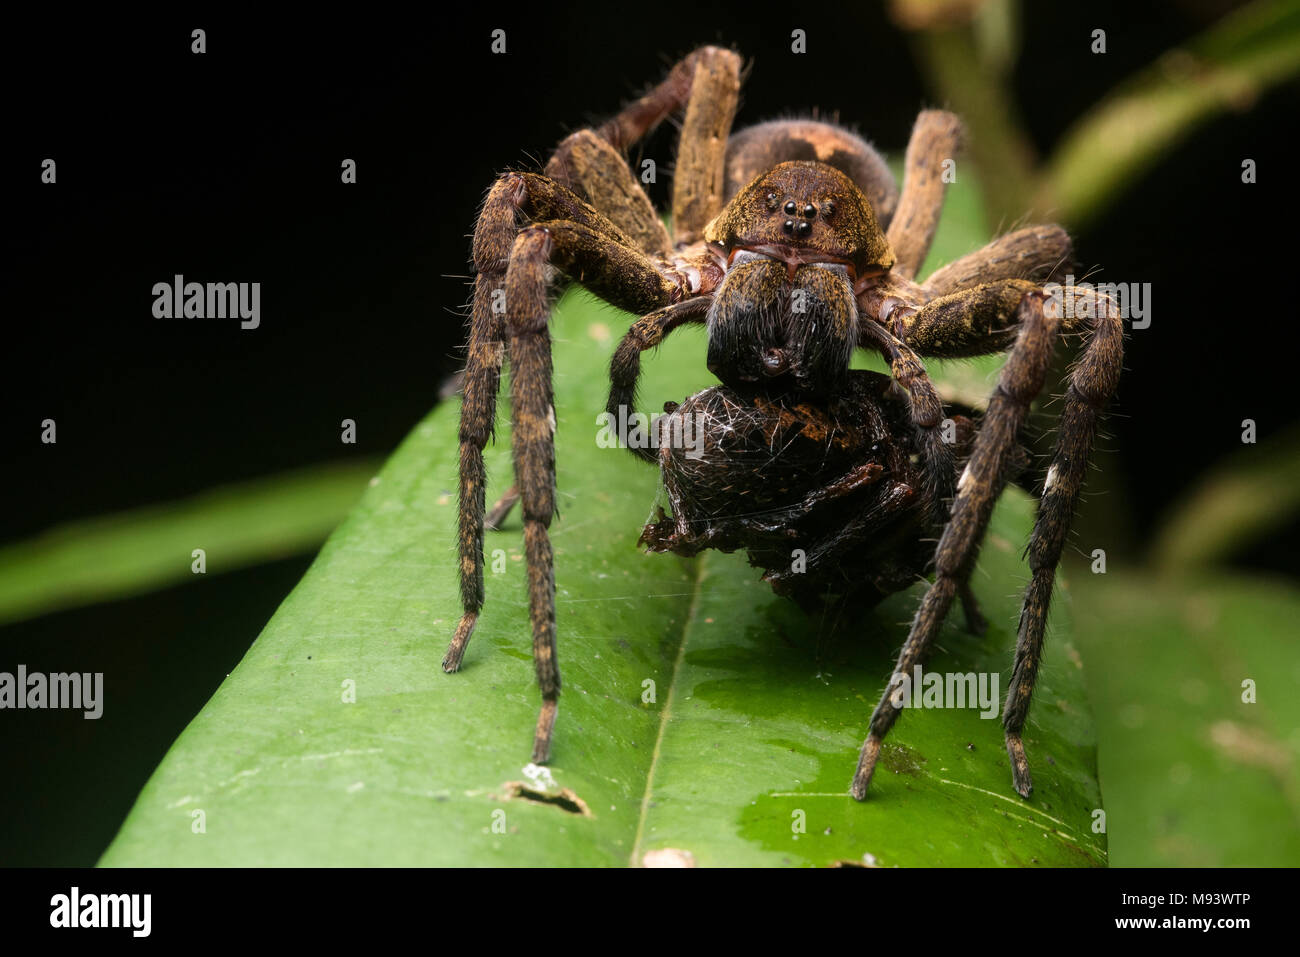 A big spider eating something else, potentially another spider, in the Peruvian jungle. Stock Photo